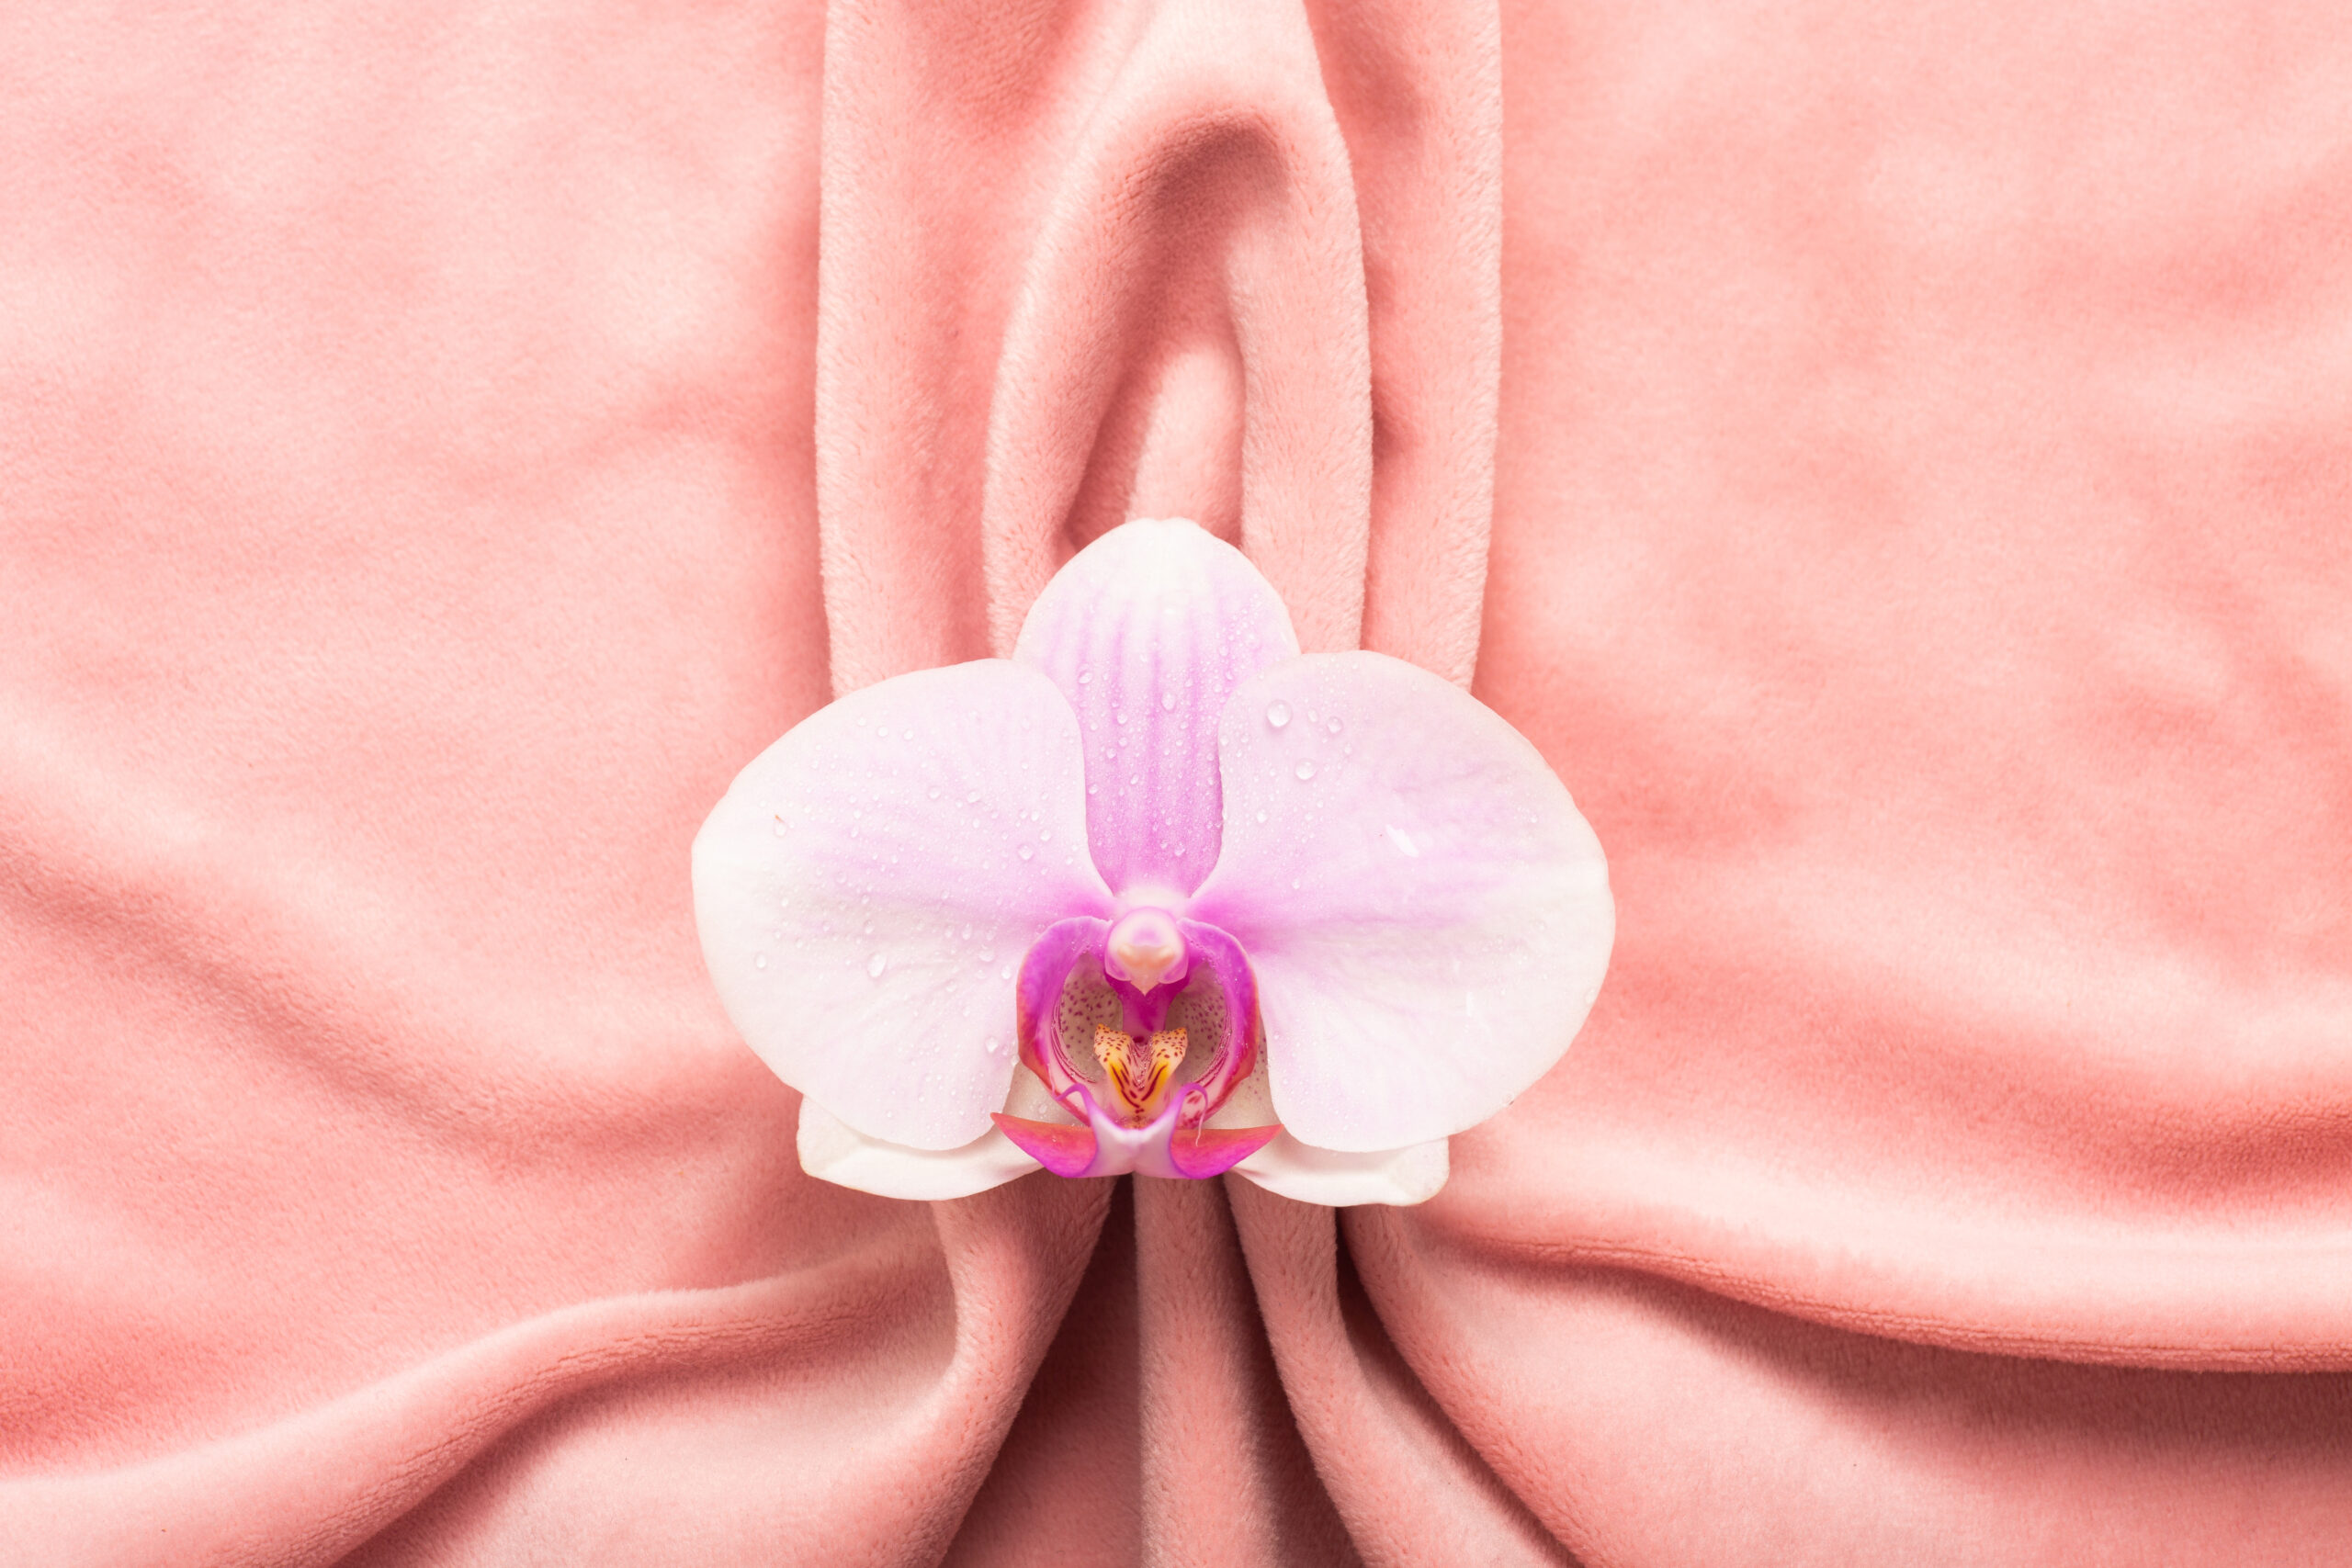 pink soft tissue form female genital organs vulva labia vagina concept with delicate flower 1 scaled